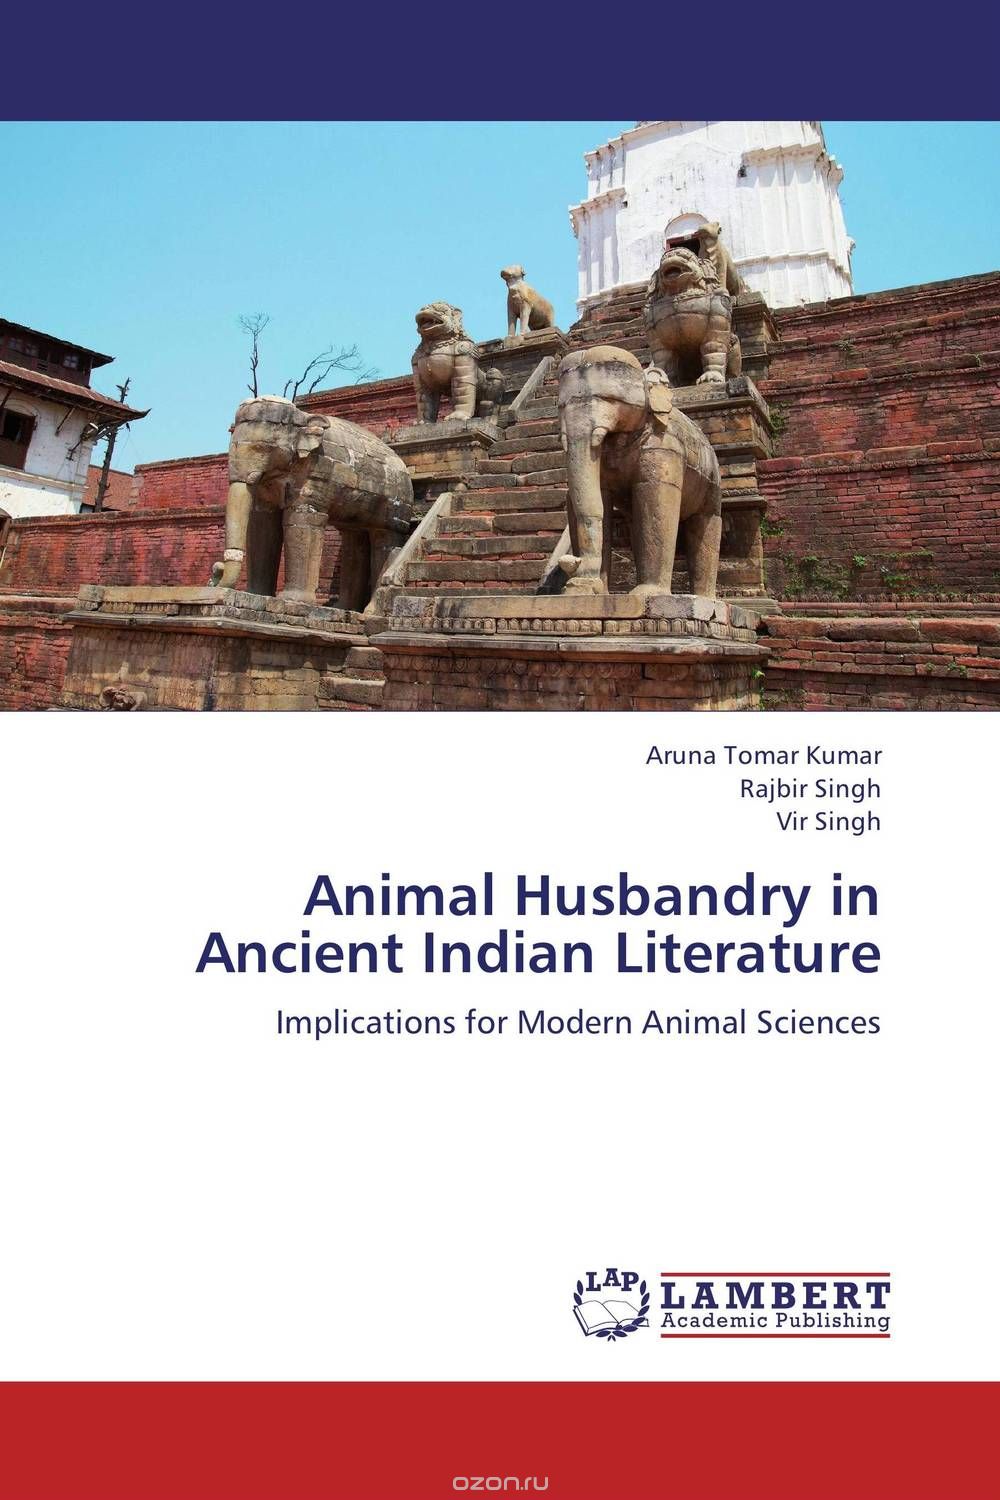 Animal Husbandry in Ancient Indian Literature